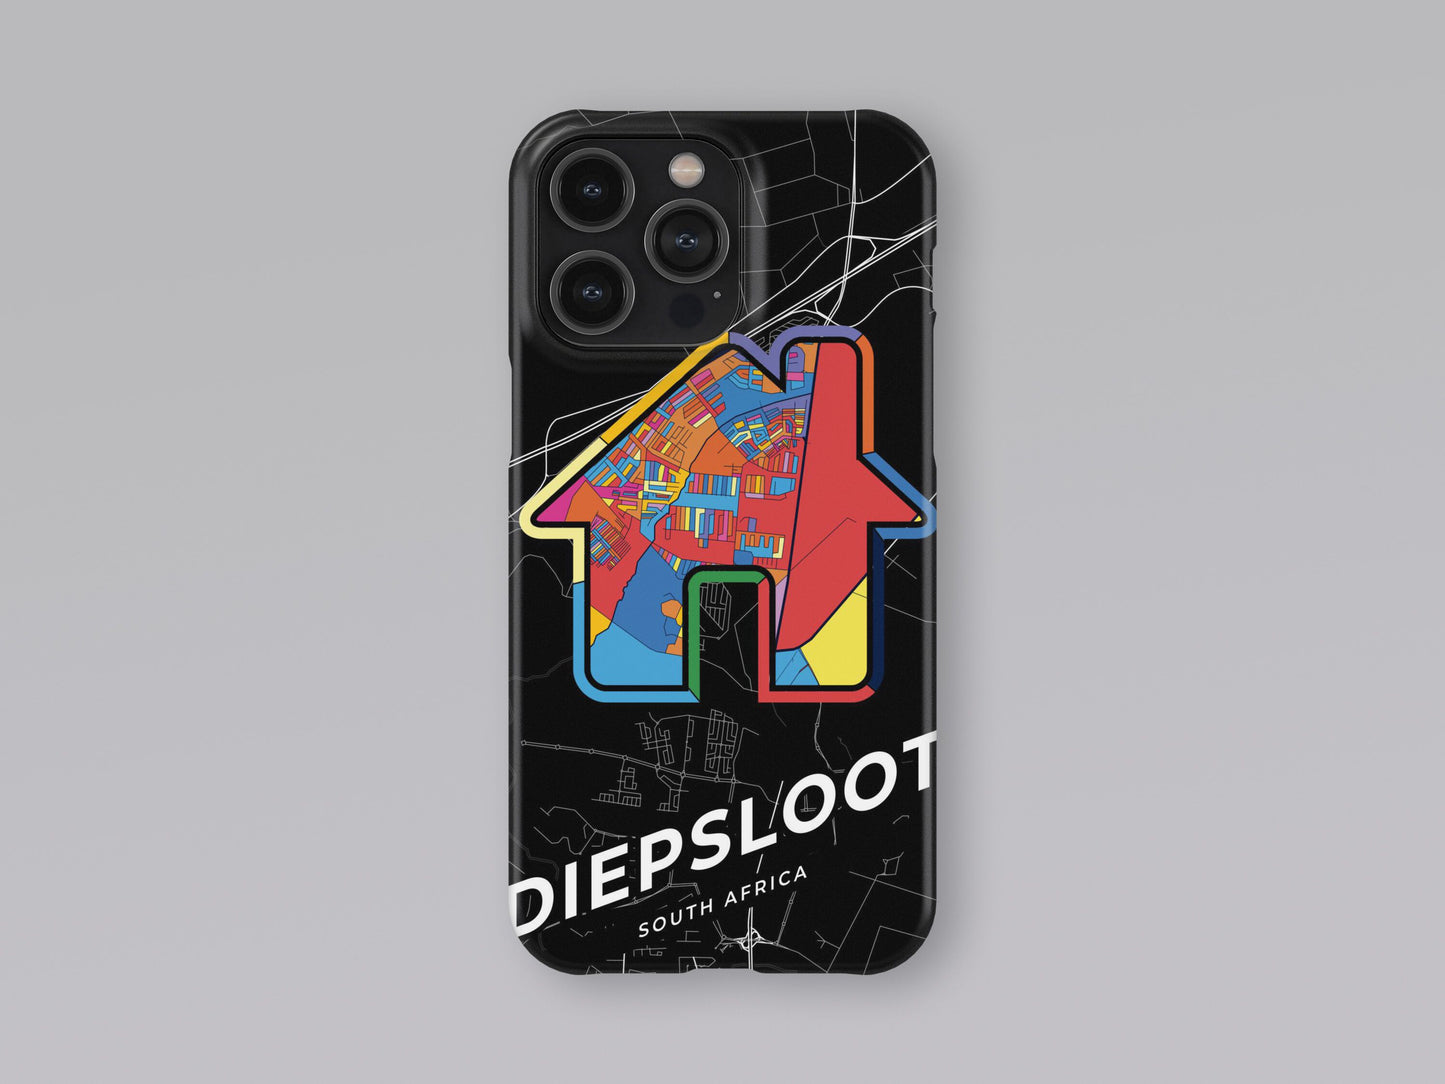 Diepsloot South Africa slim phone case with colorful icon. Birthday, wedding or housewarming gift. Couple match cases. 3